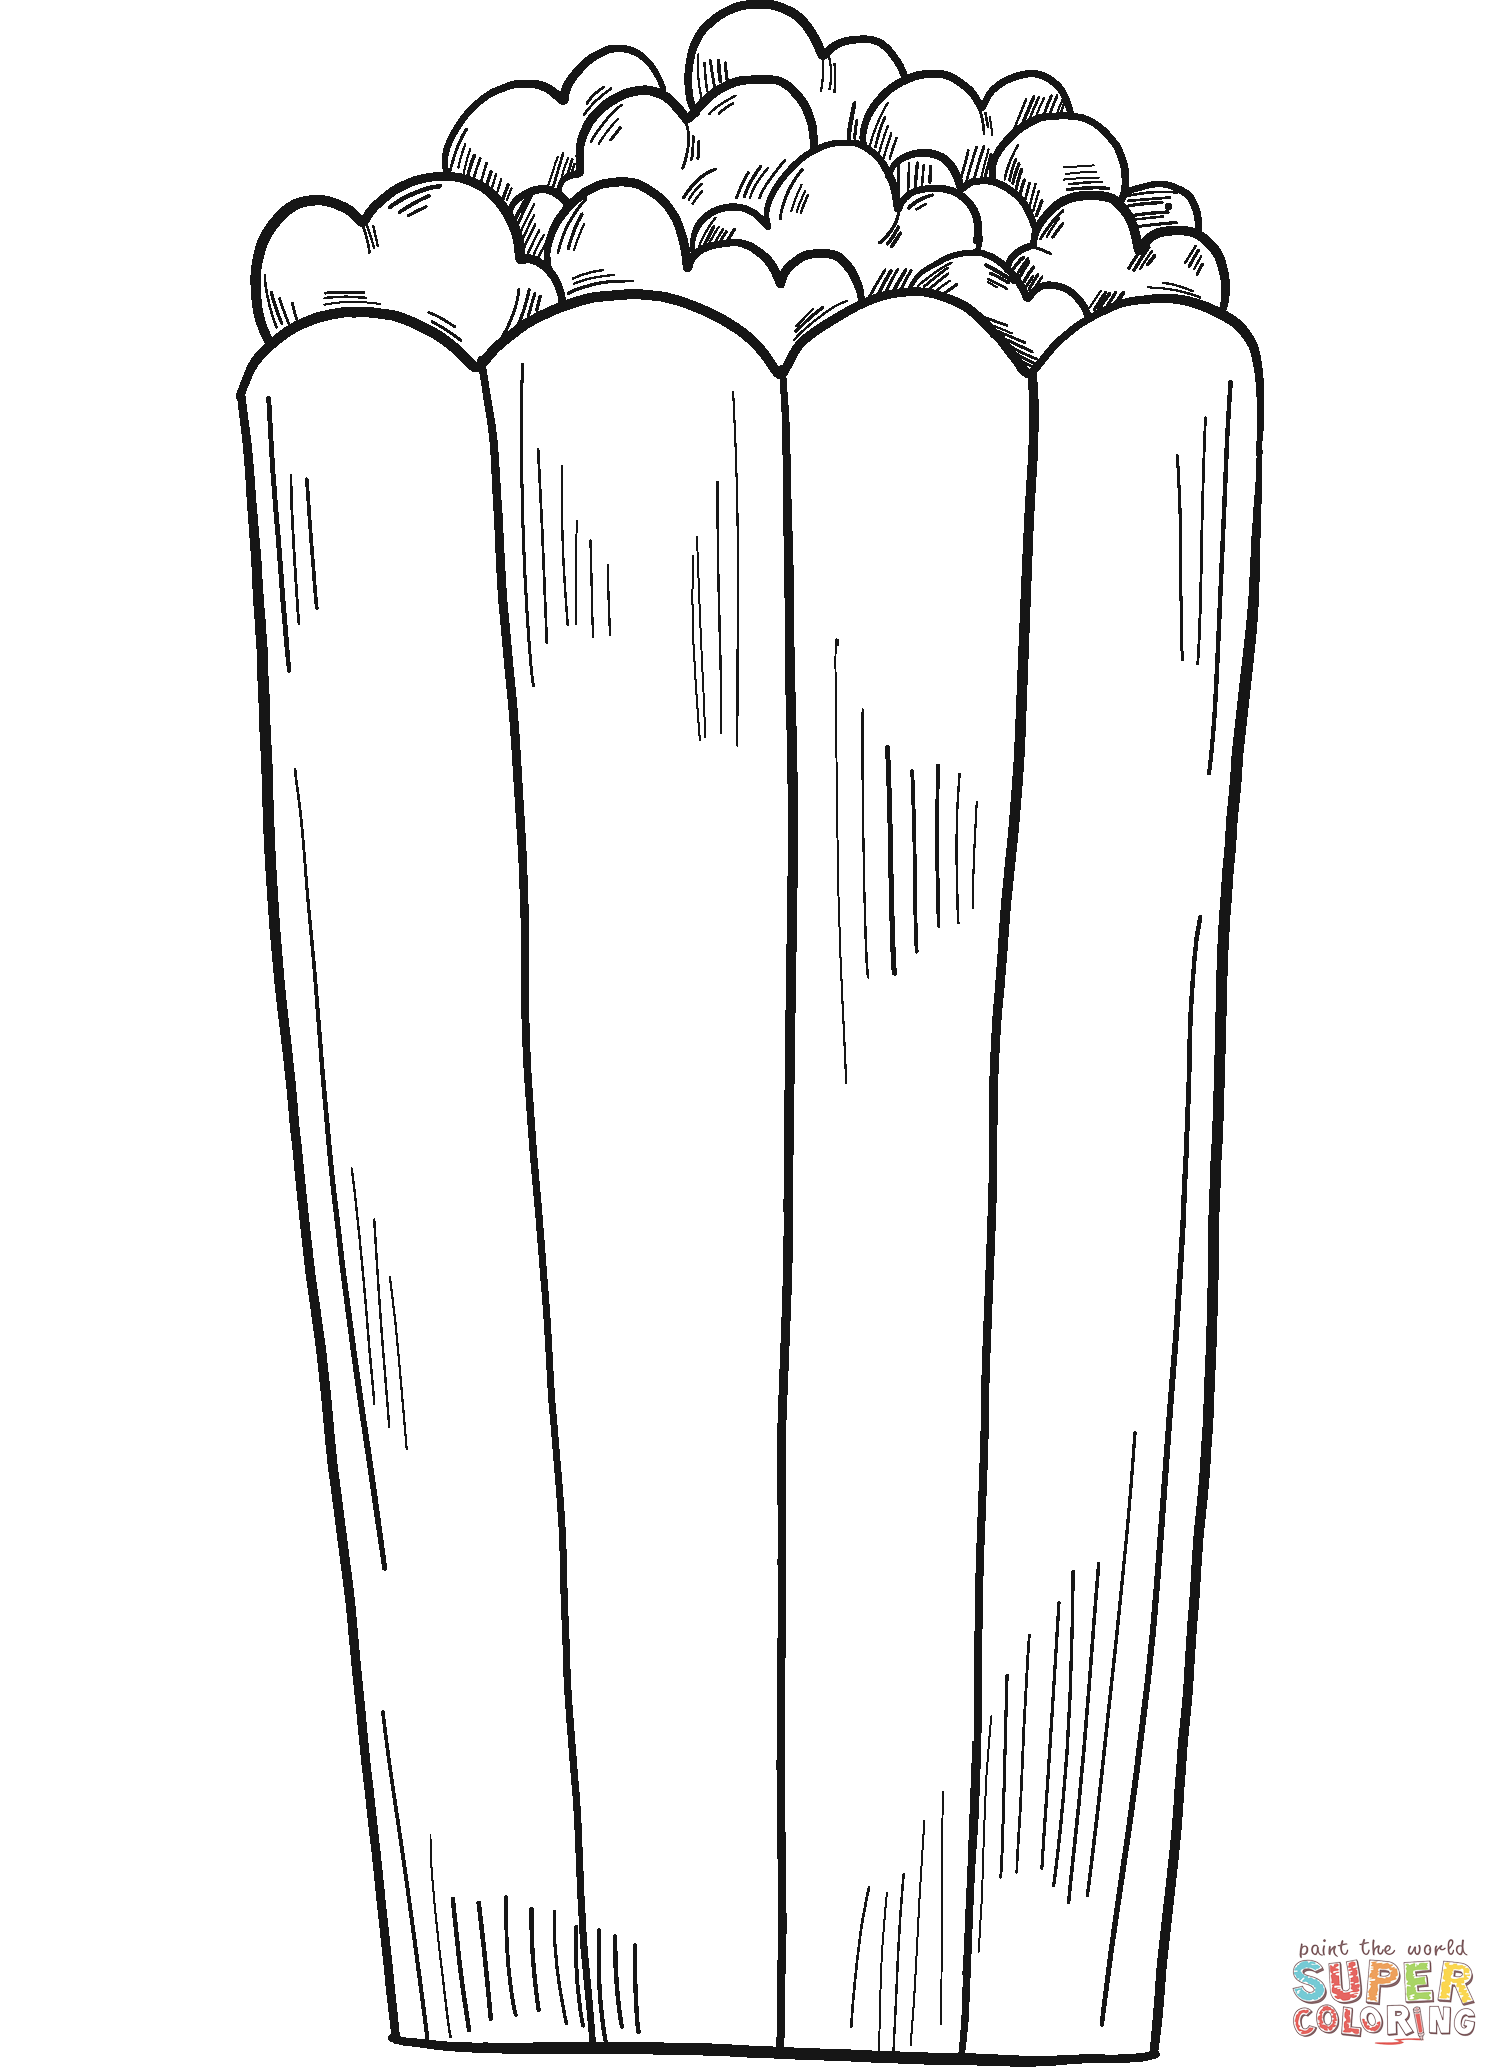 Popcorn coloring page free printable coloring pages